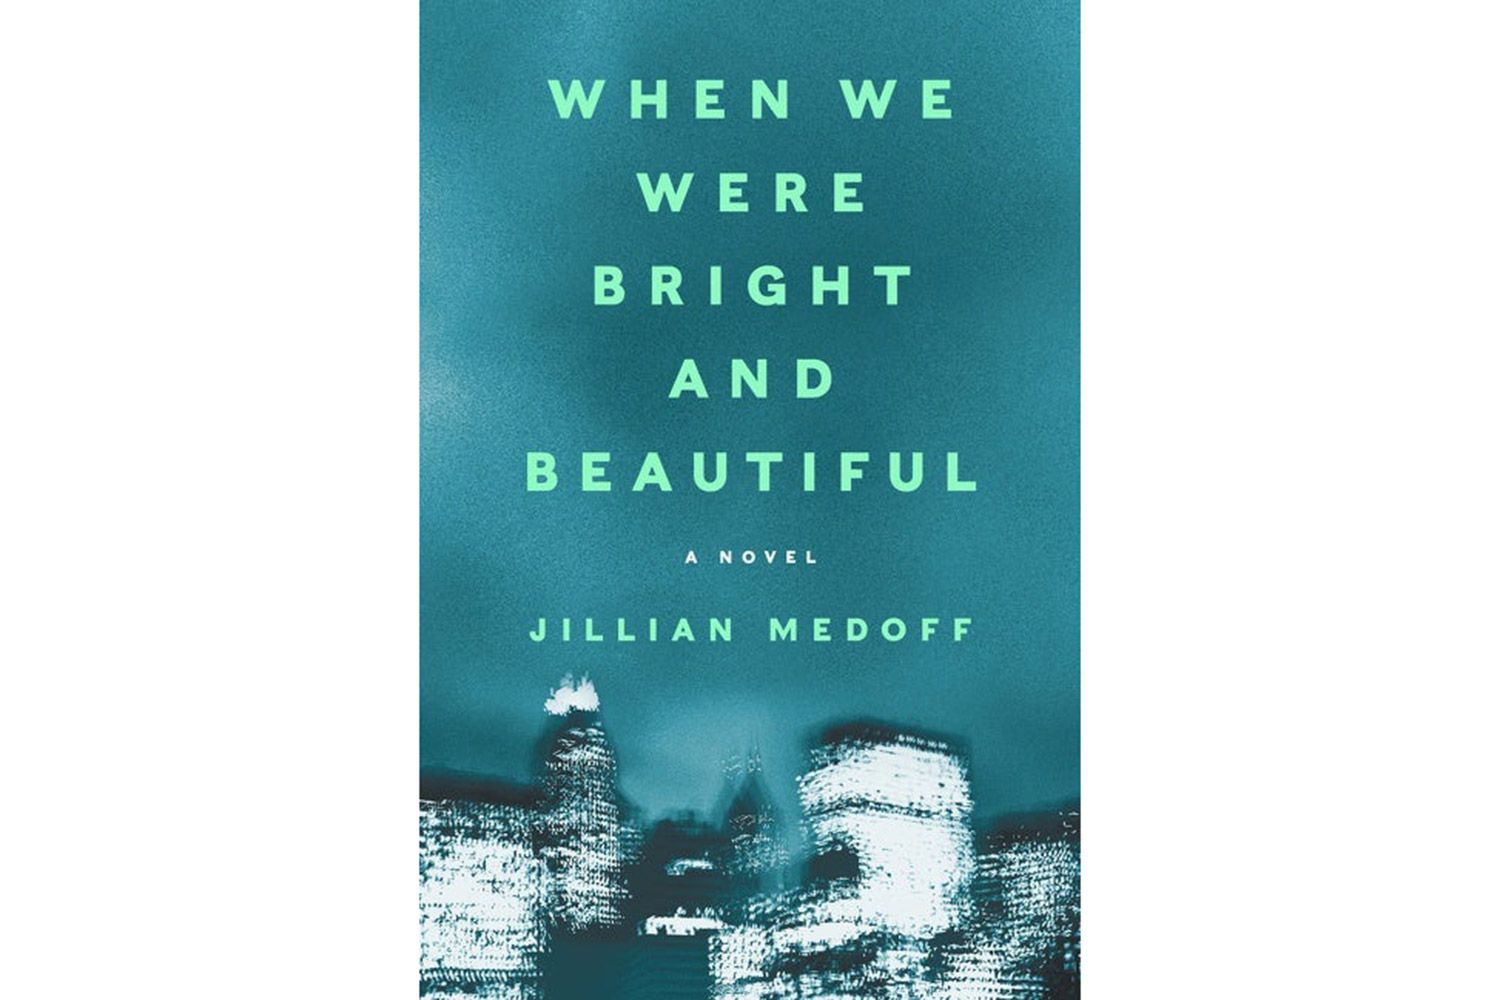 Preview When We Were Bright and Beautiful by Jillian Medoff